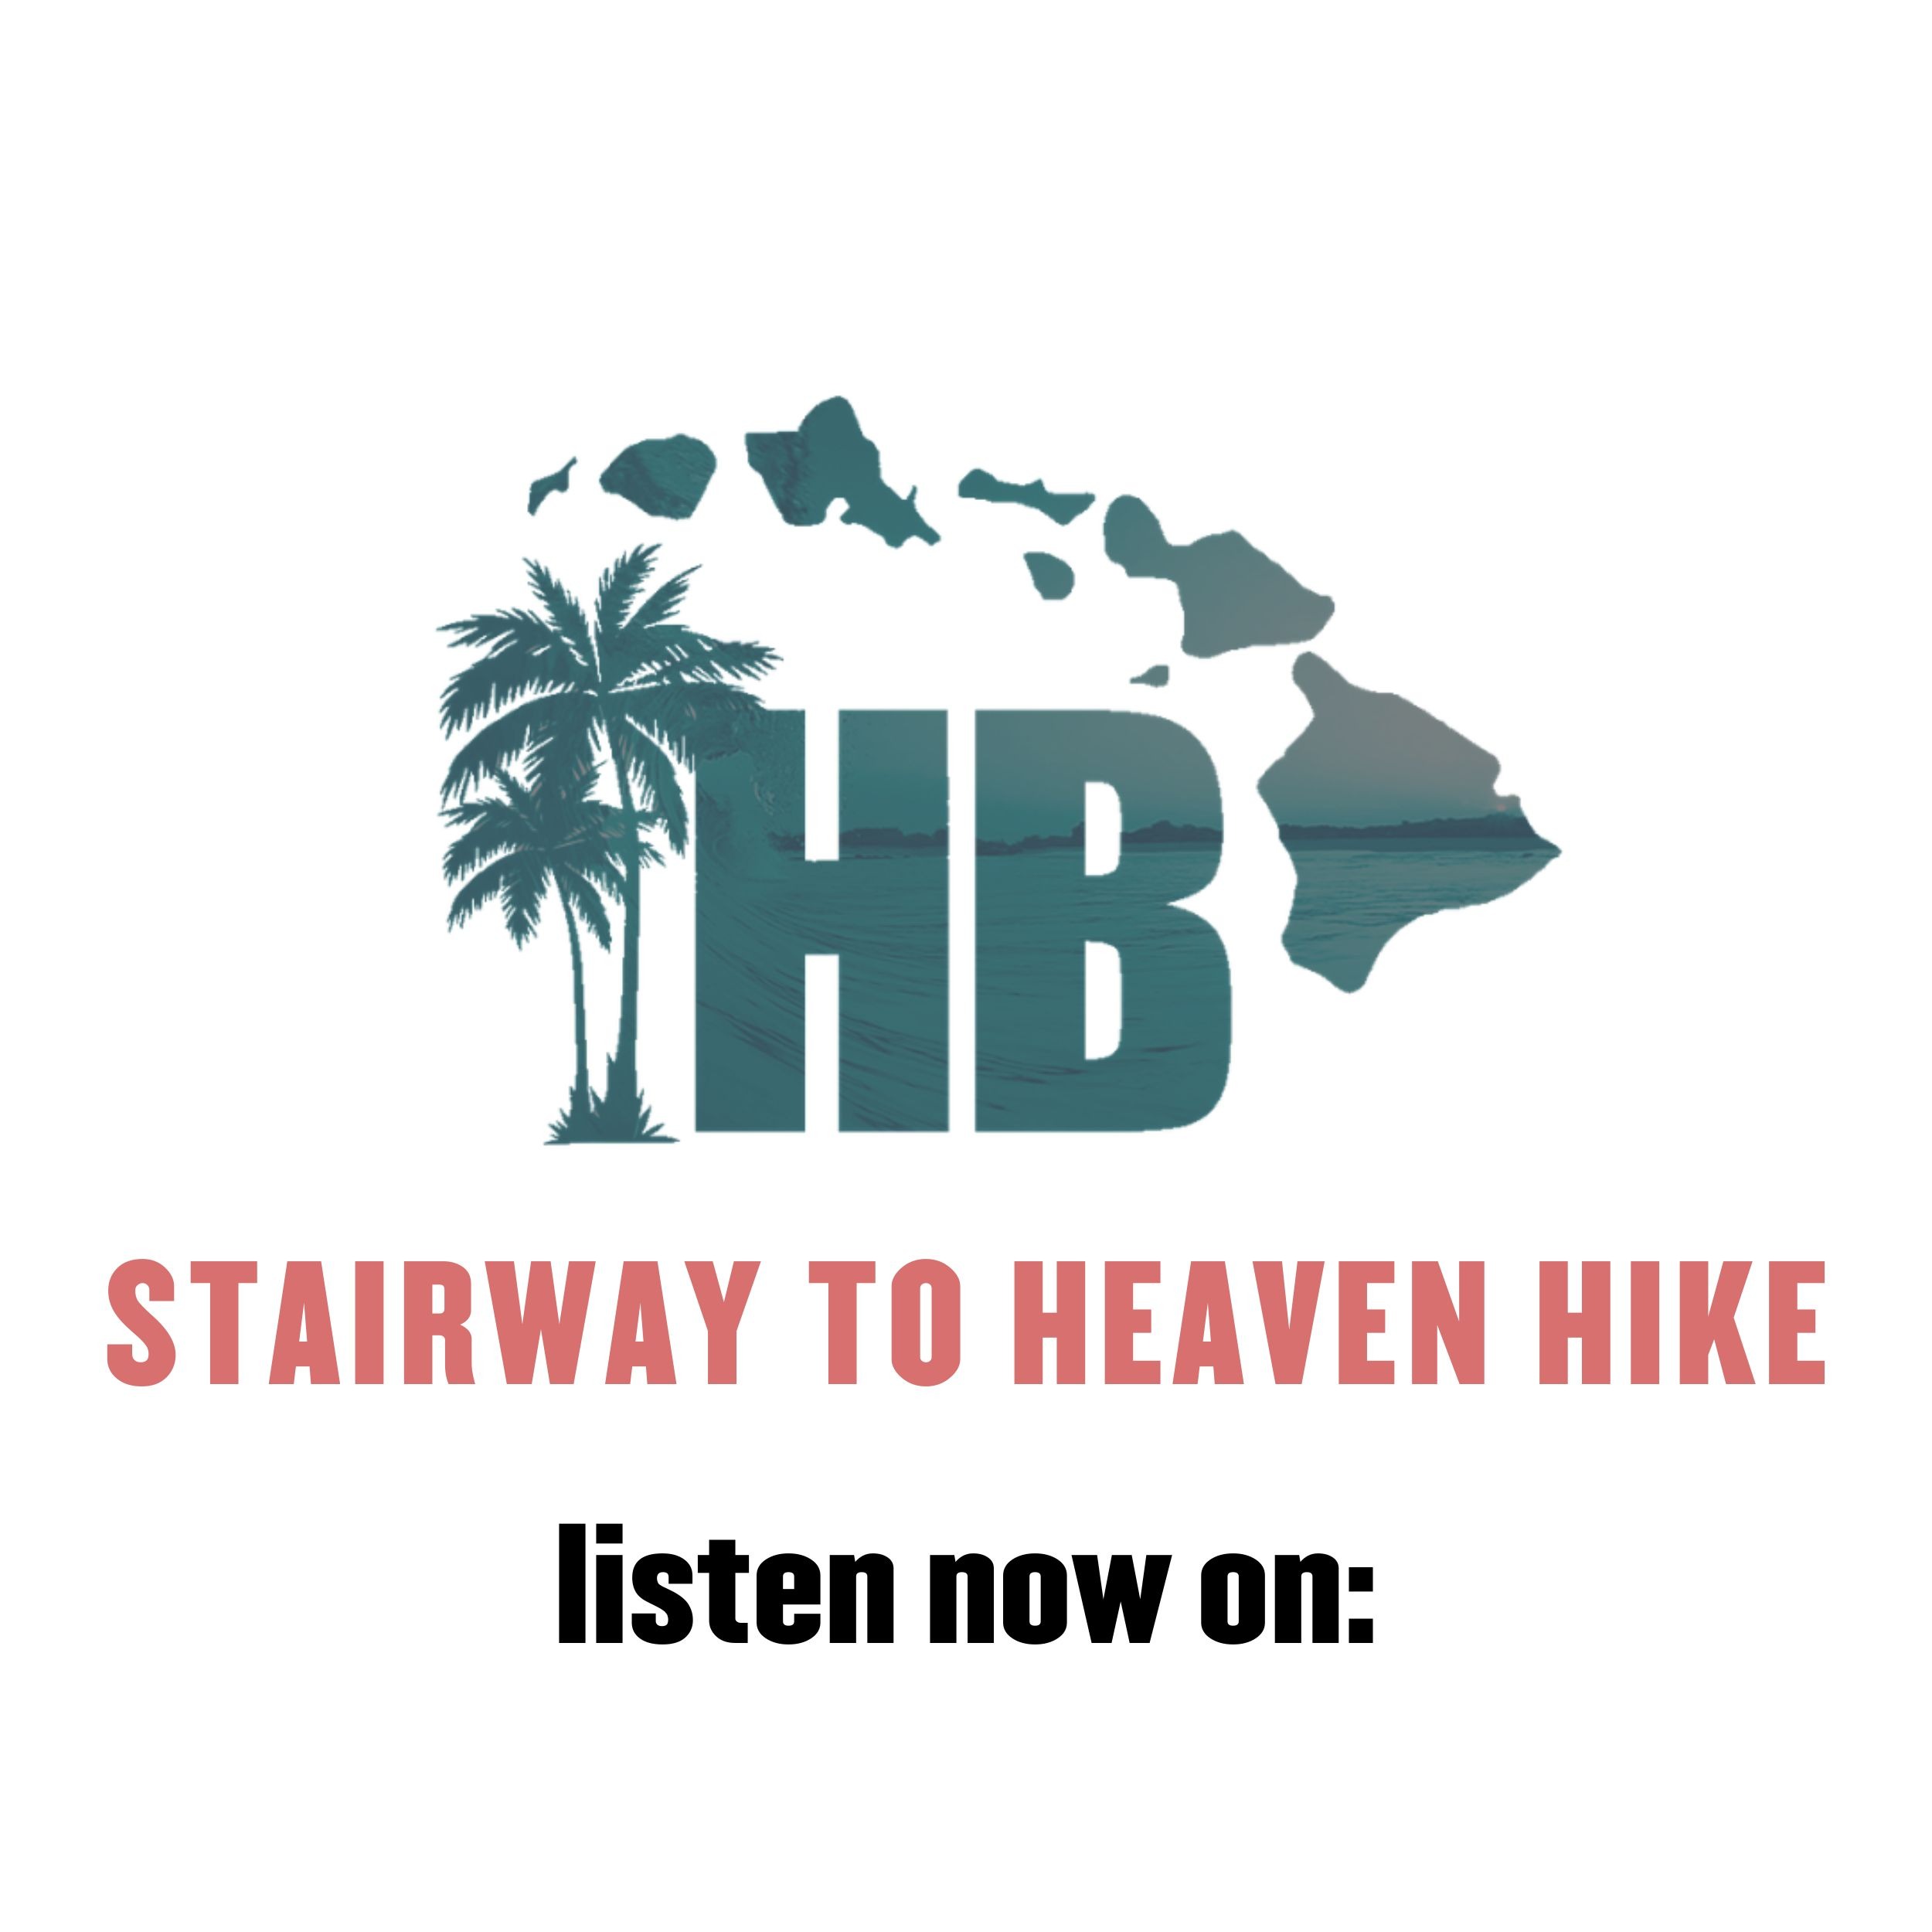 stairway to heaven hike podcast